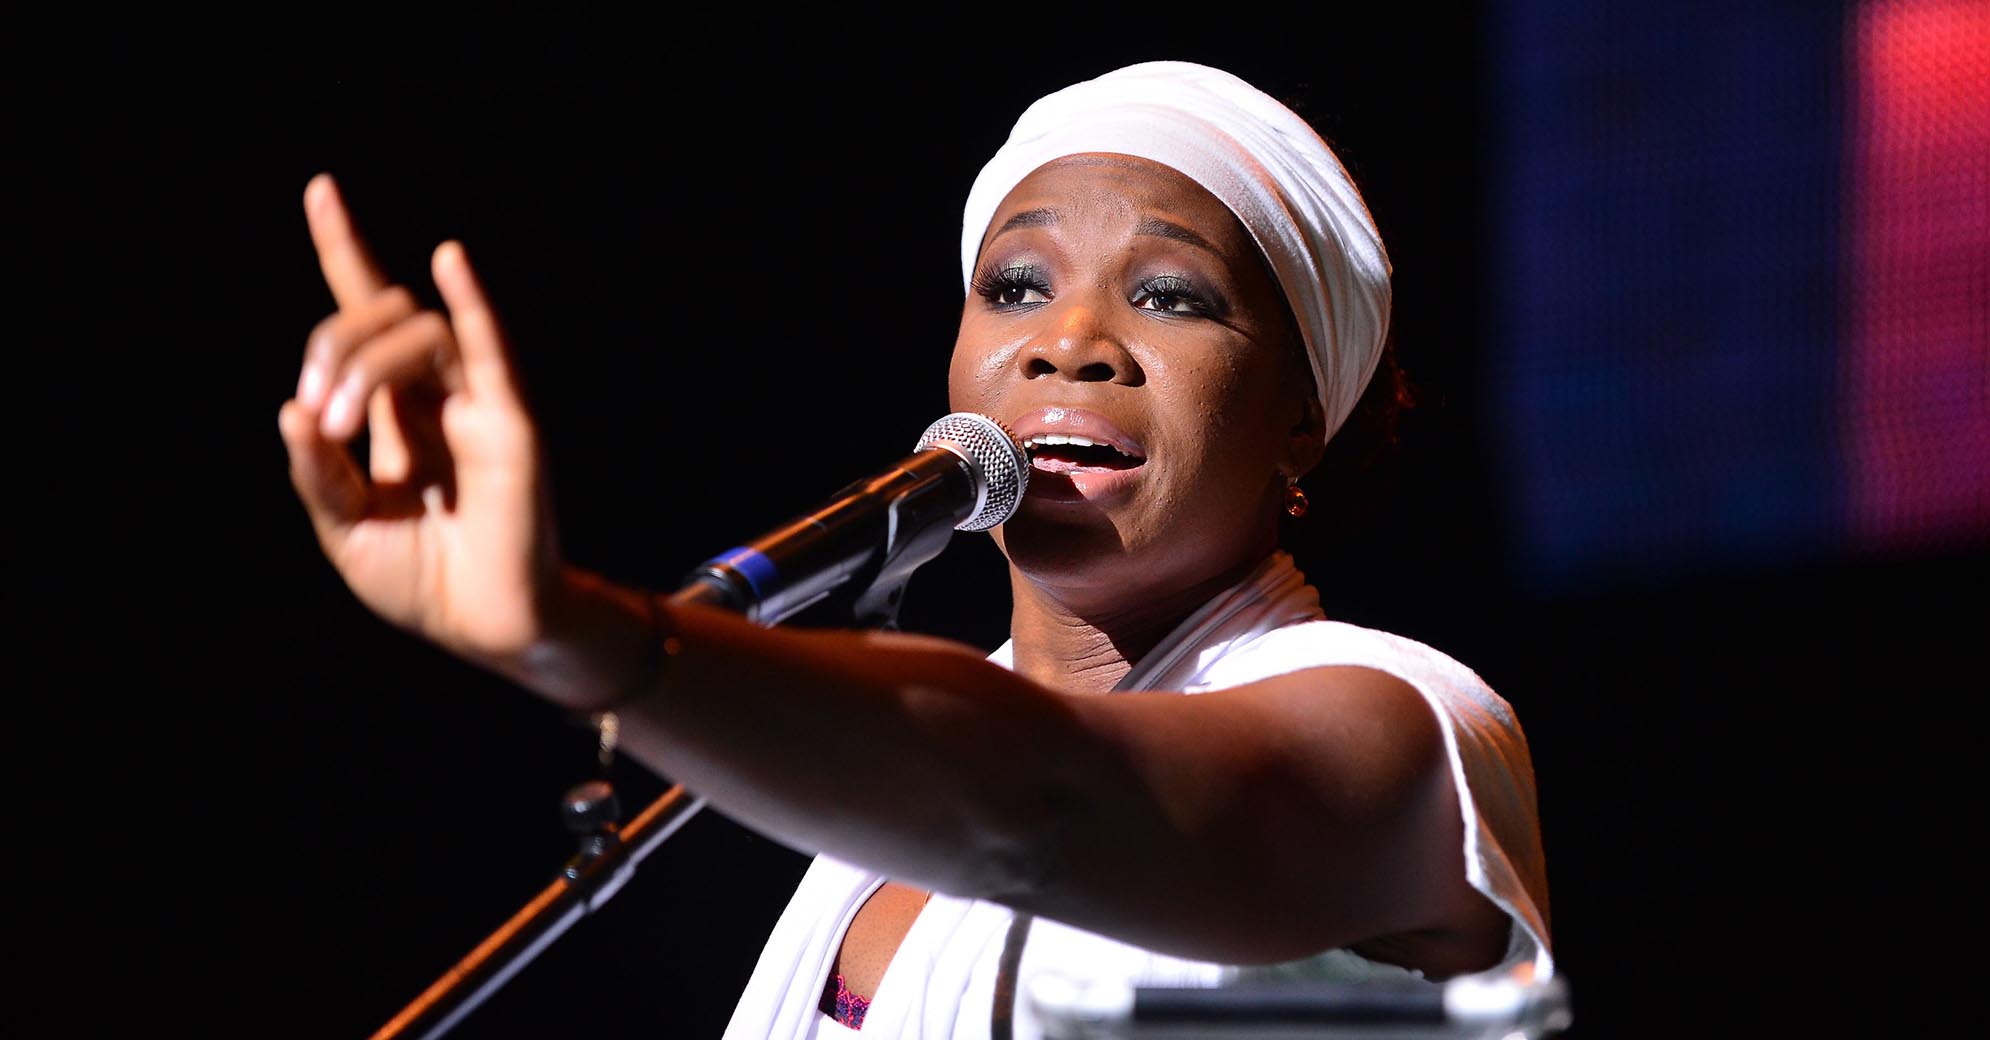 India Arie Photo by Vallery Jean/FilmMagic